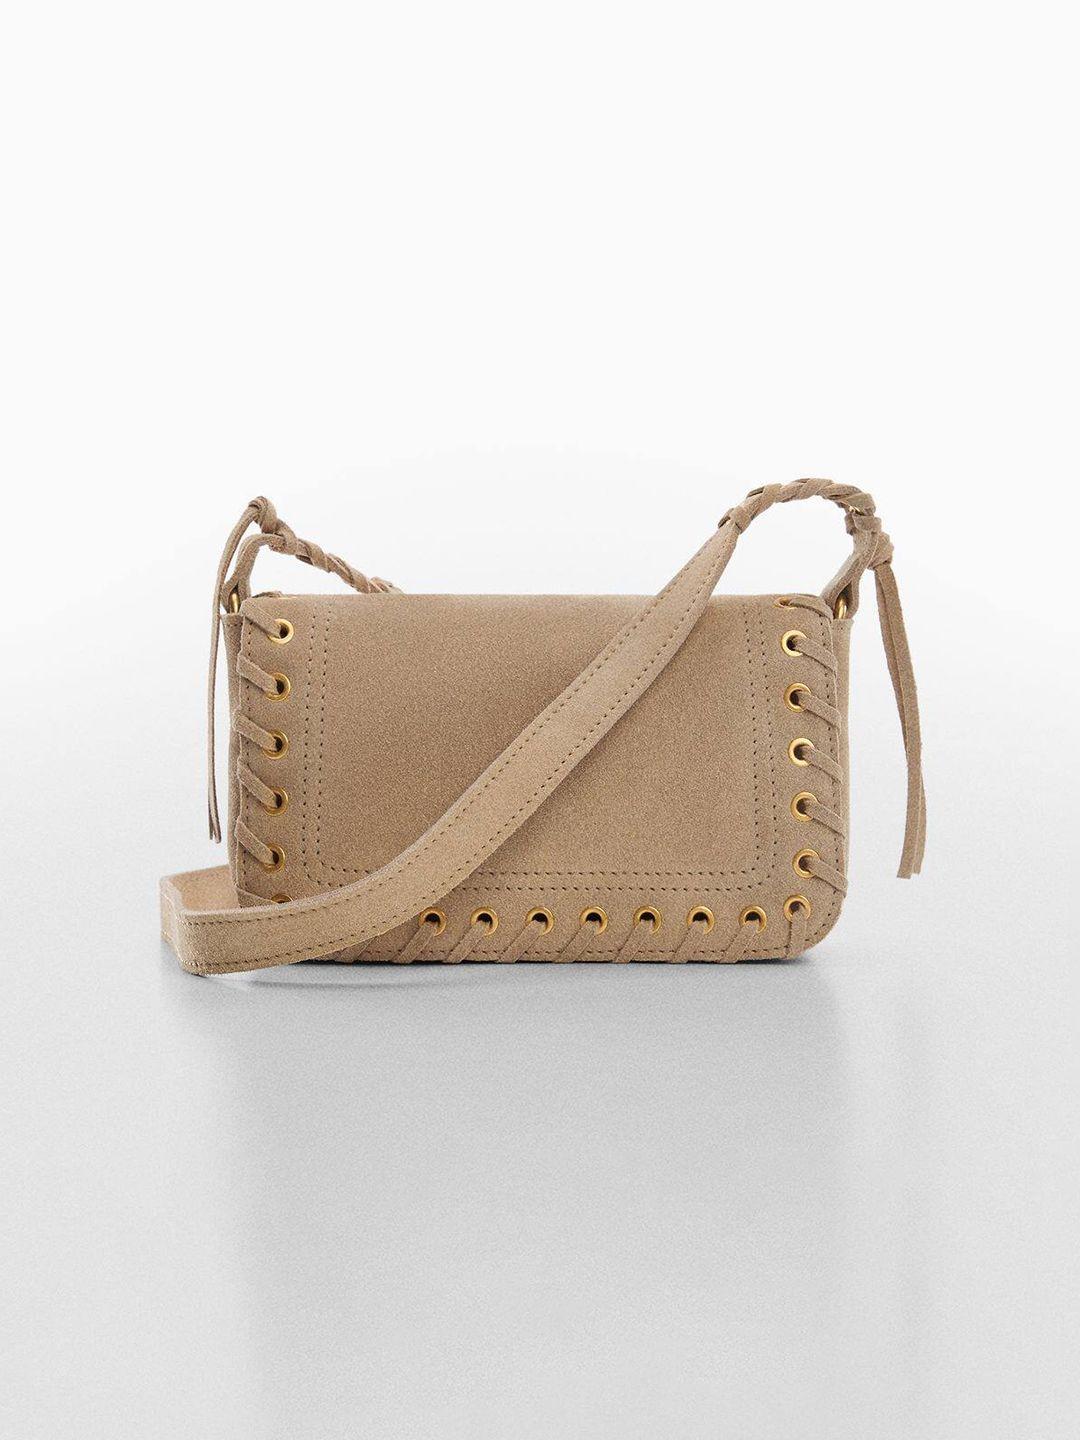 mango leather structured sling bag with rivet detail